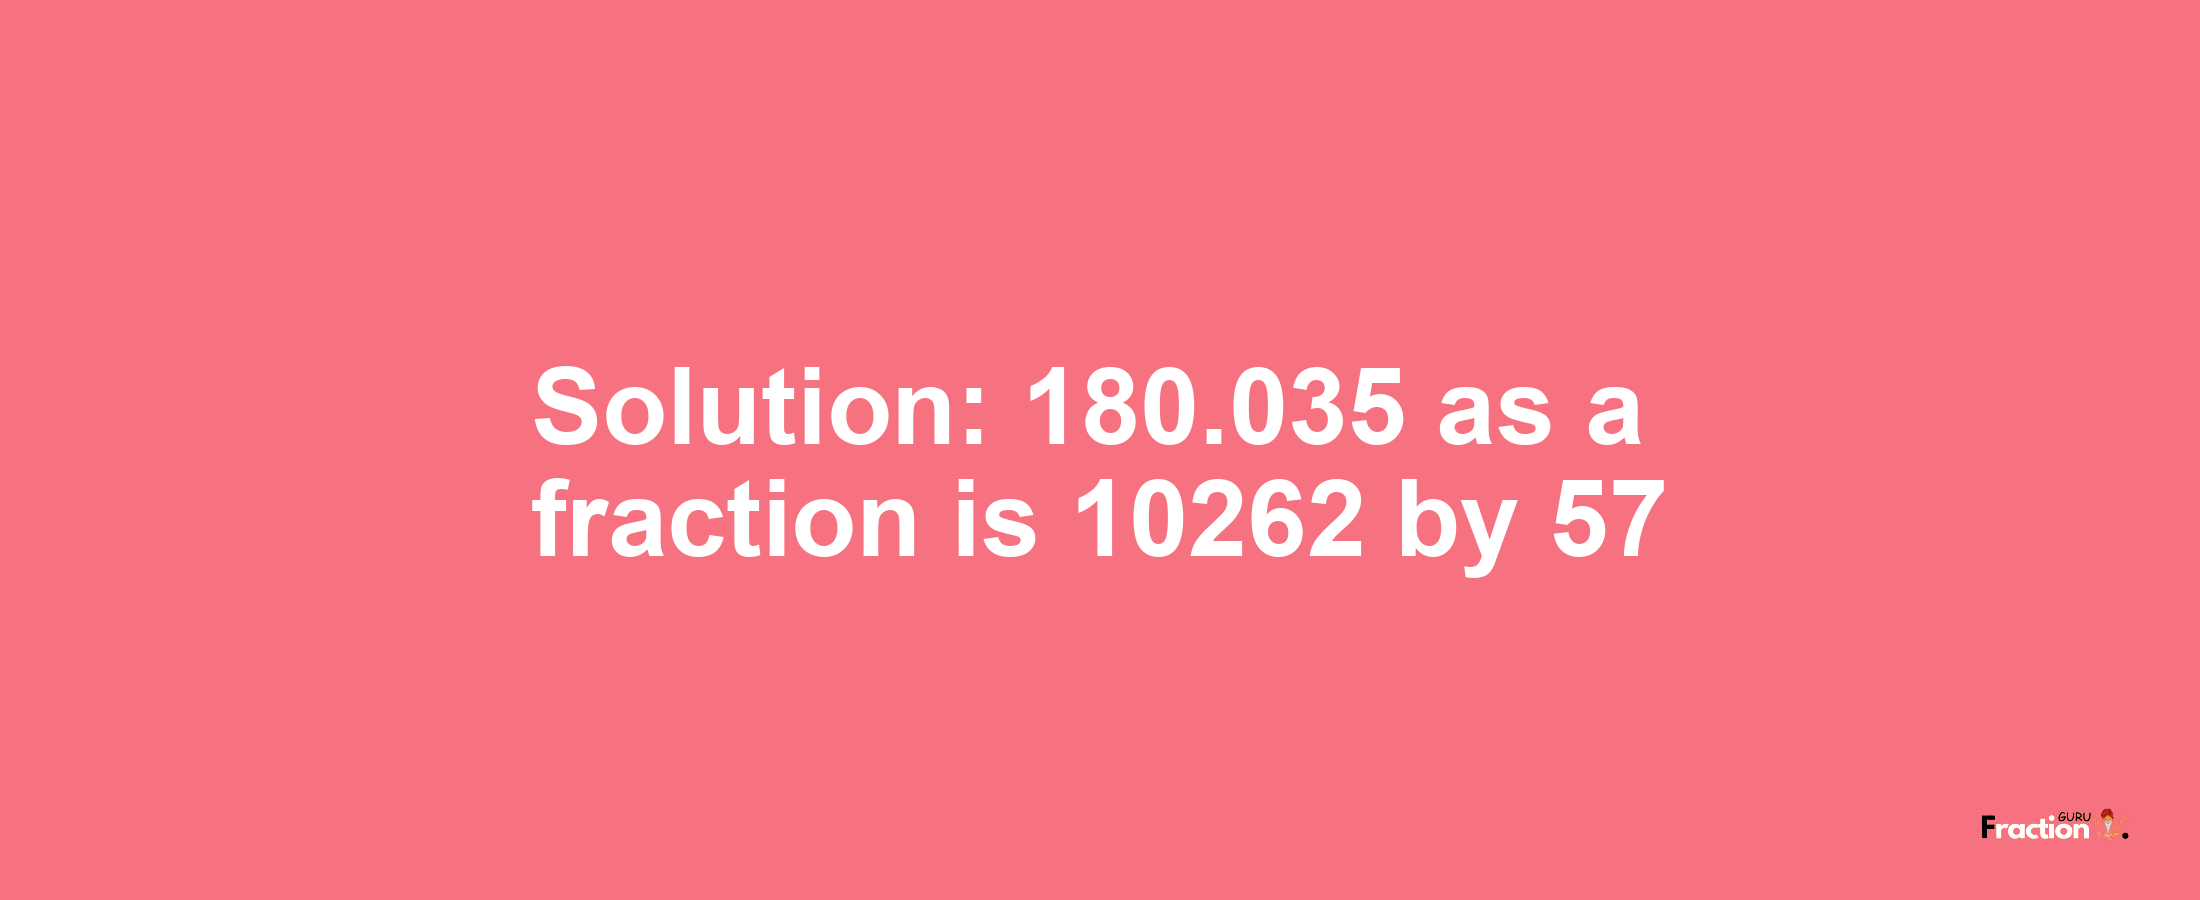 Solution:180.035 as a fraction is 10262/57